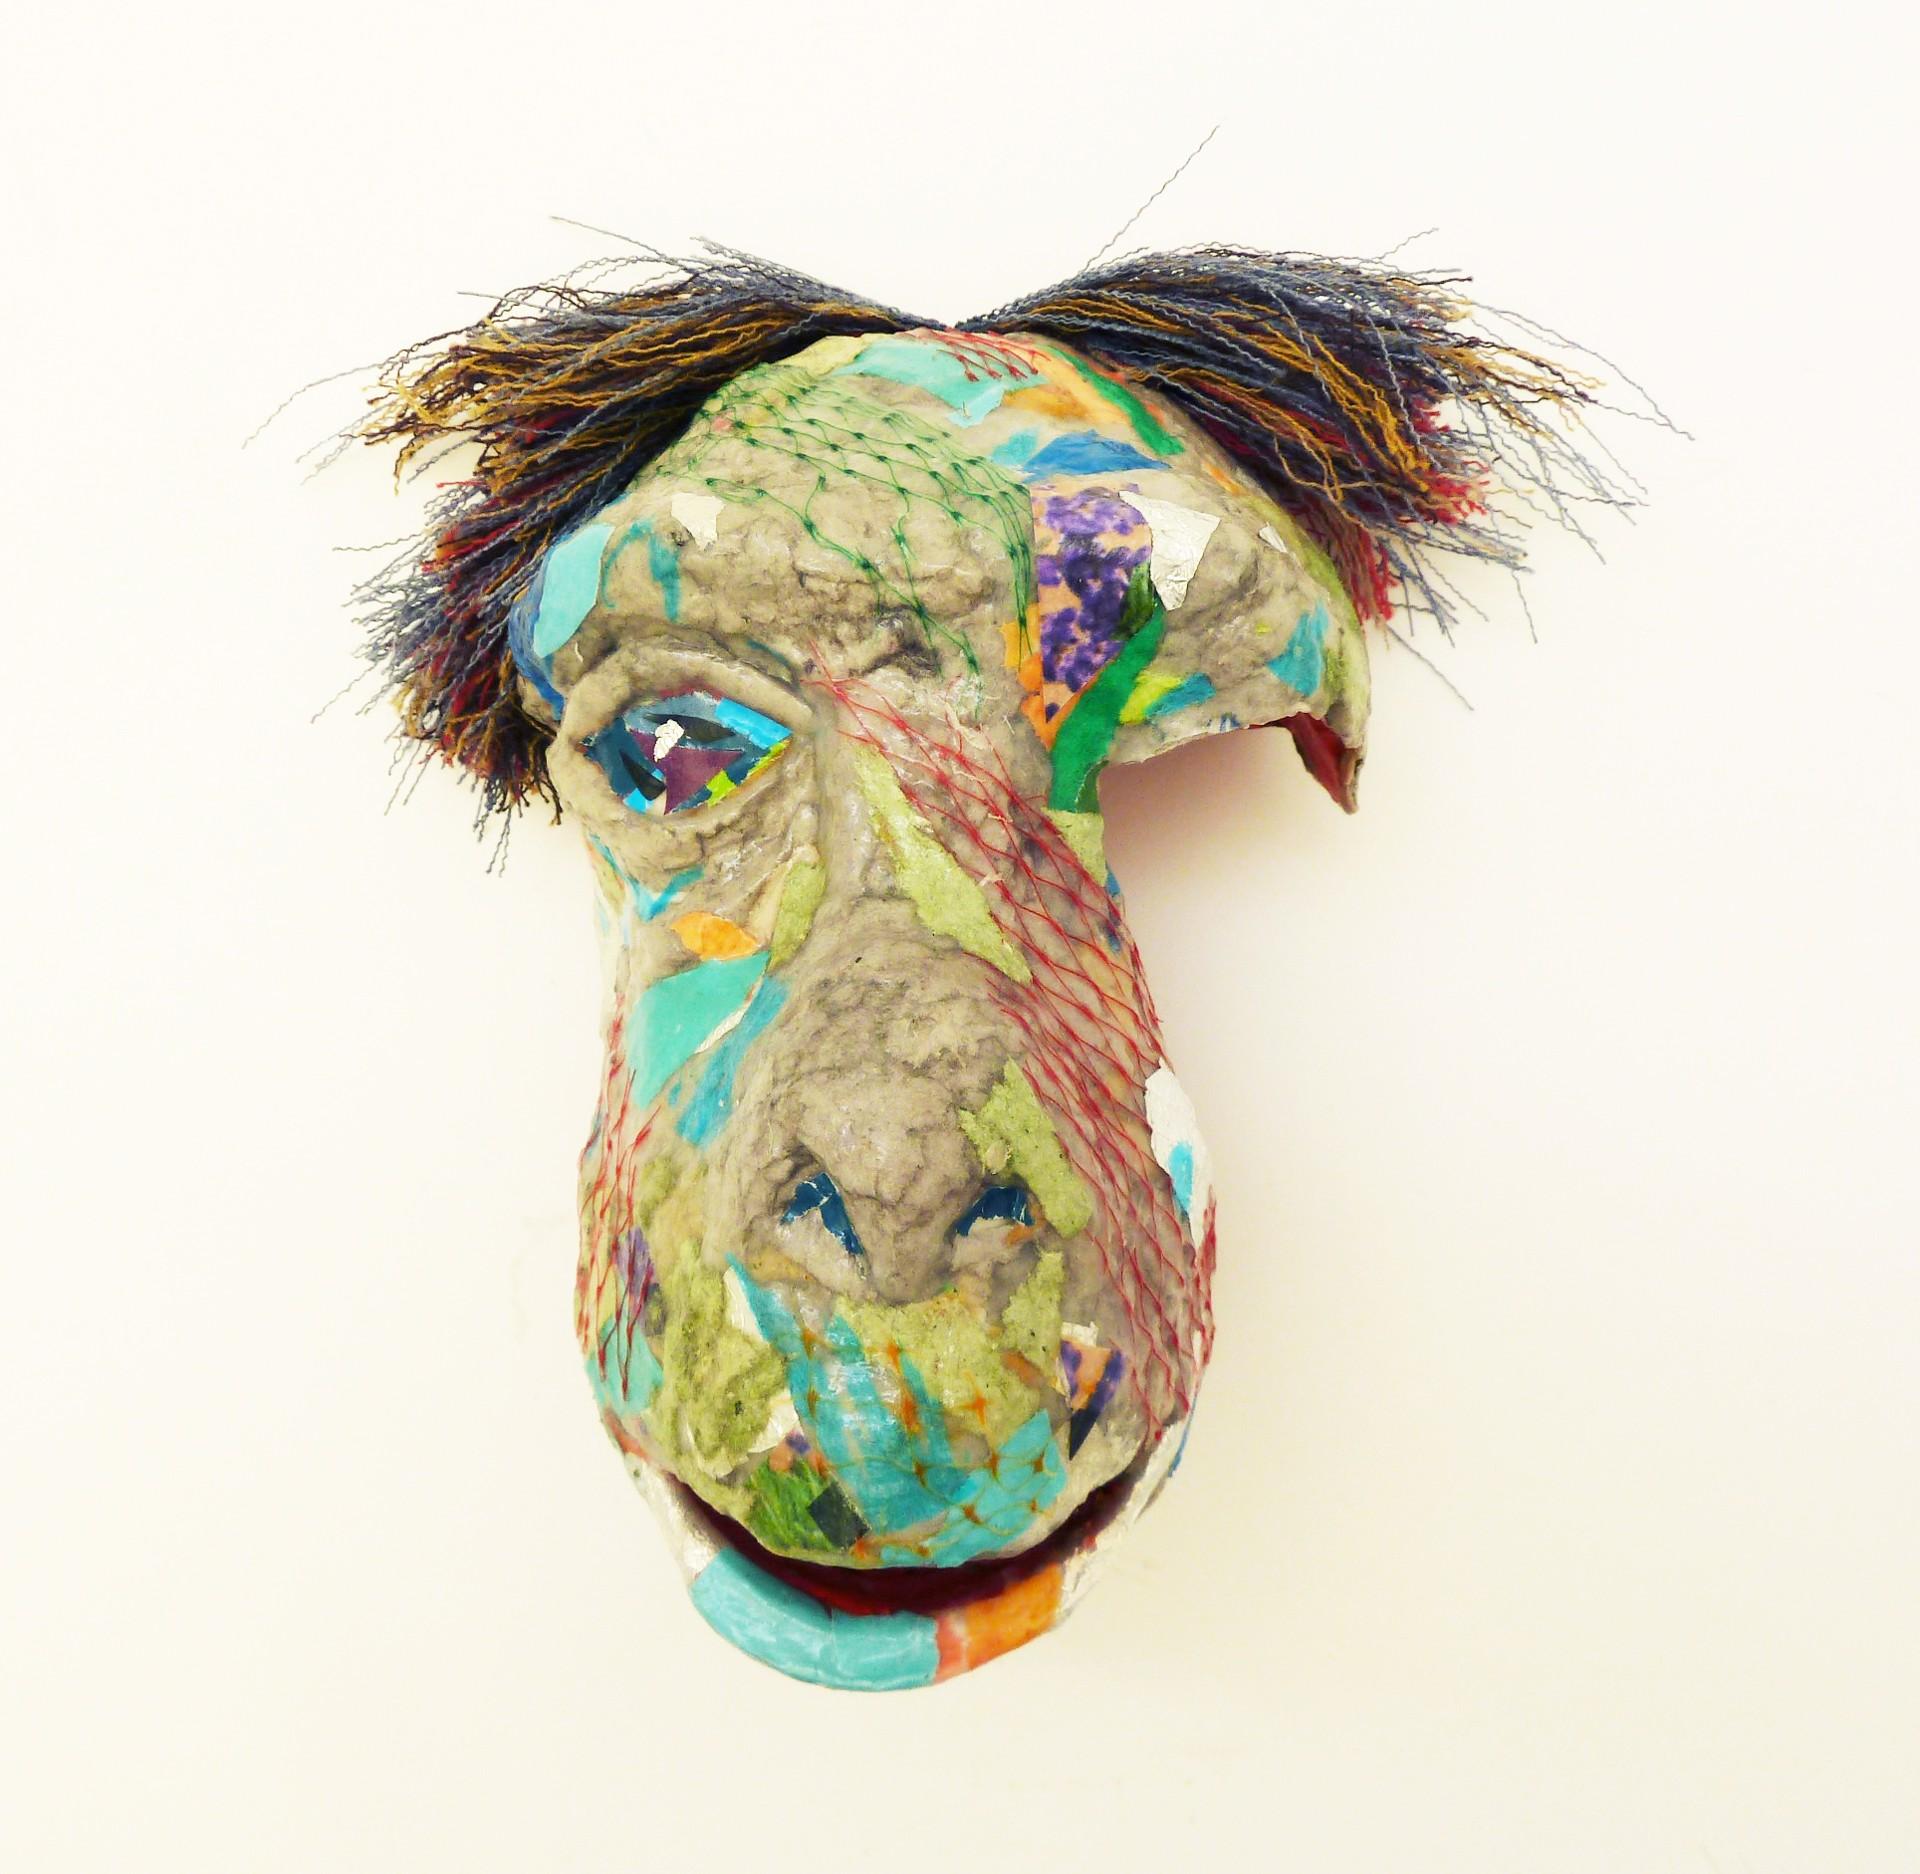 Yulia Shtern Figurative Sculpture - Bonobo II - Contemporary Sculpture Made with Up-cycled Materials(Green+Teal)